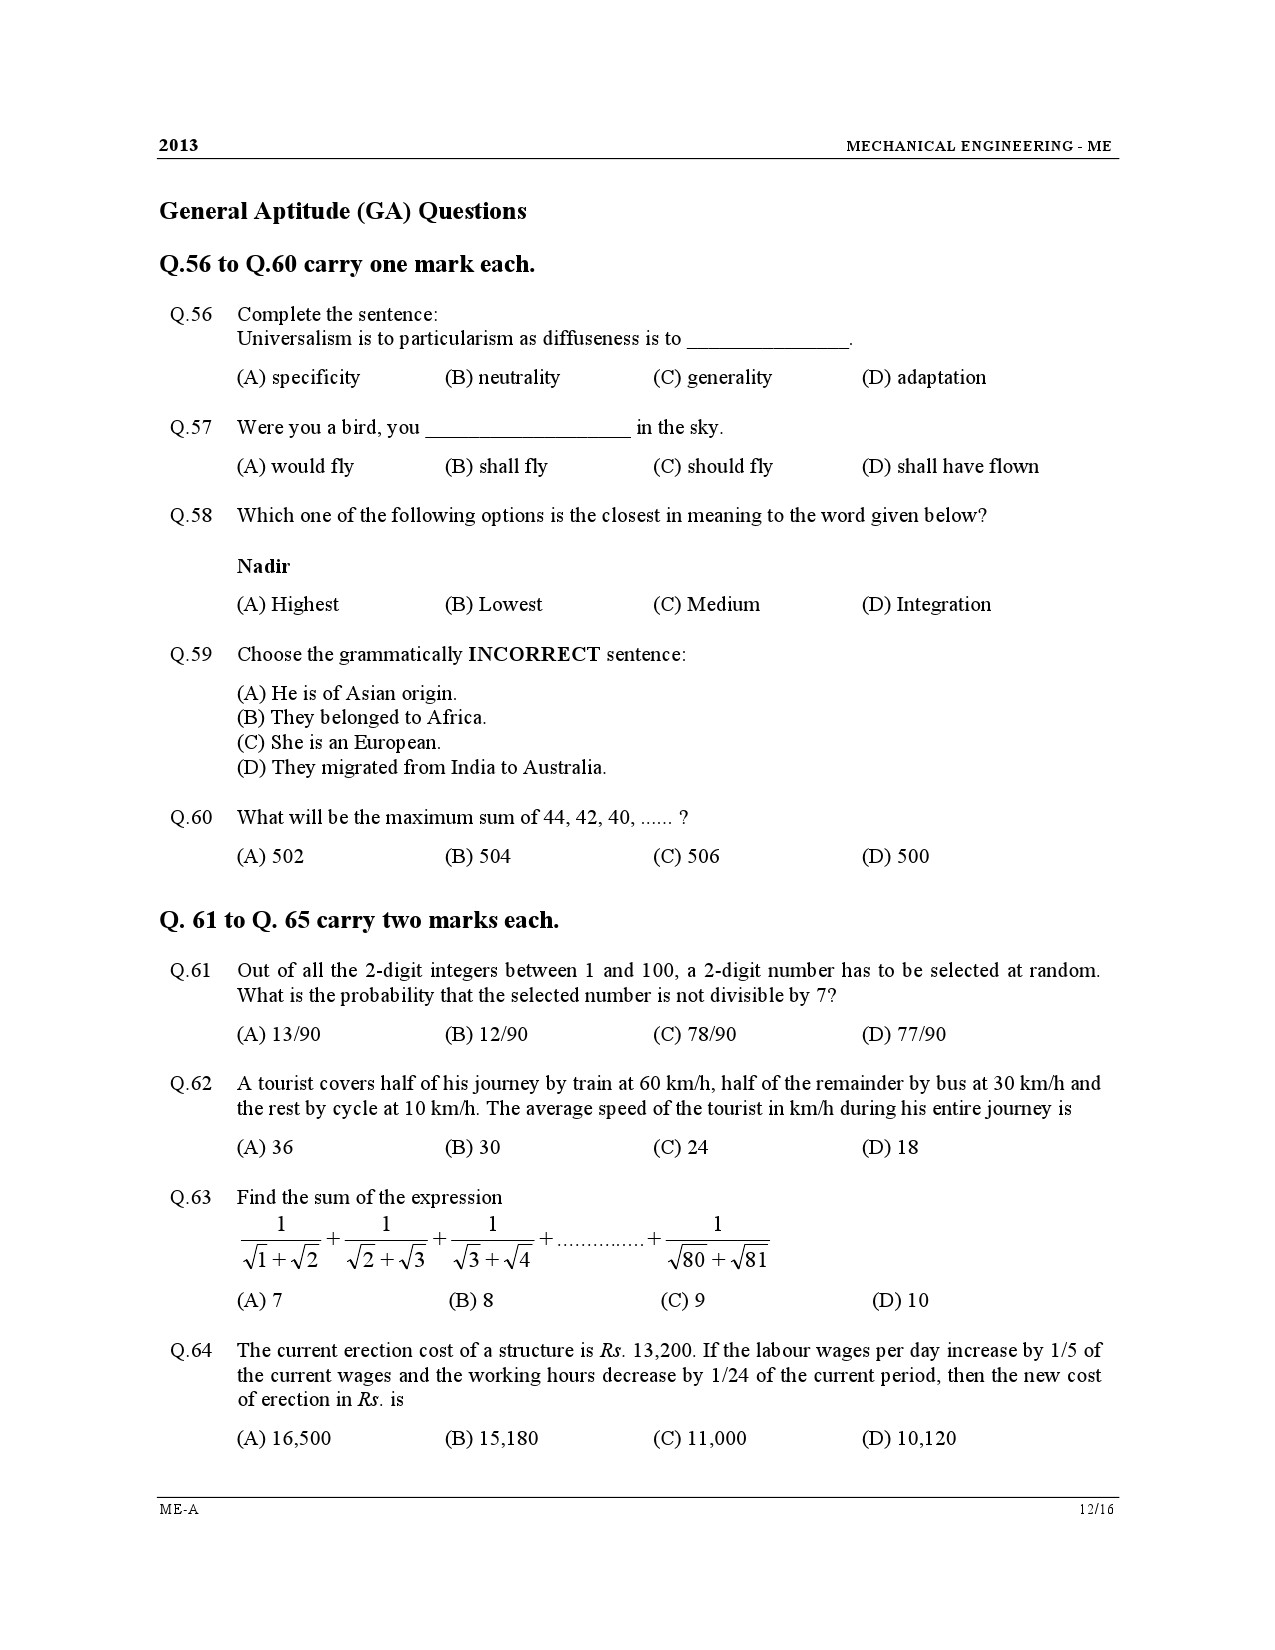 GATE Exam Question Paper 2013 Mechanical Engineering 12